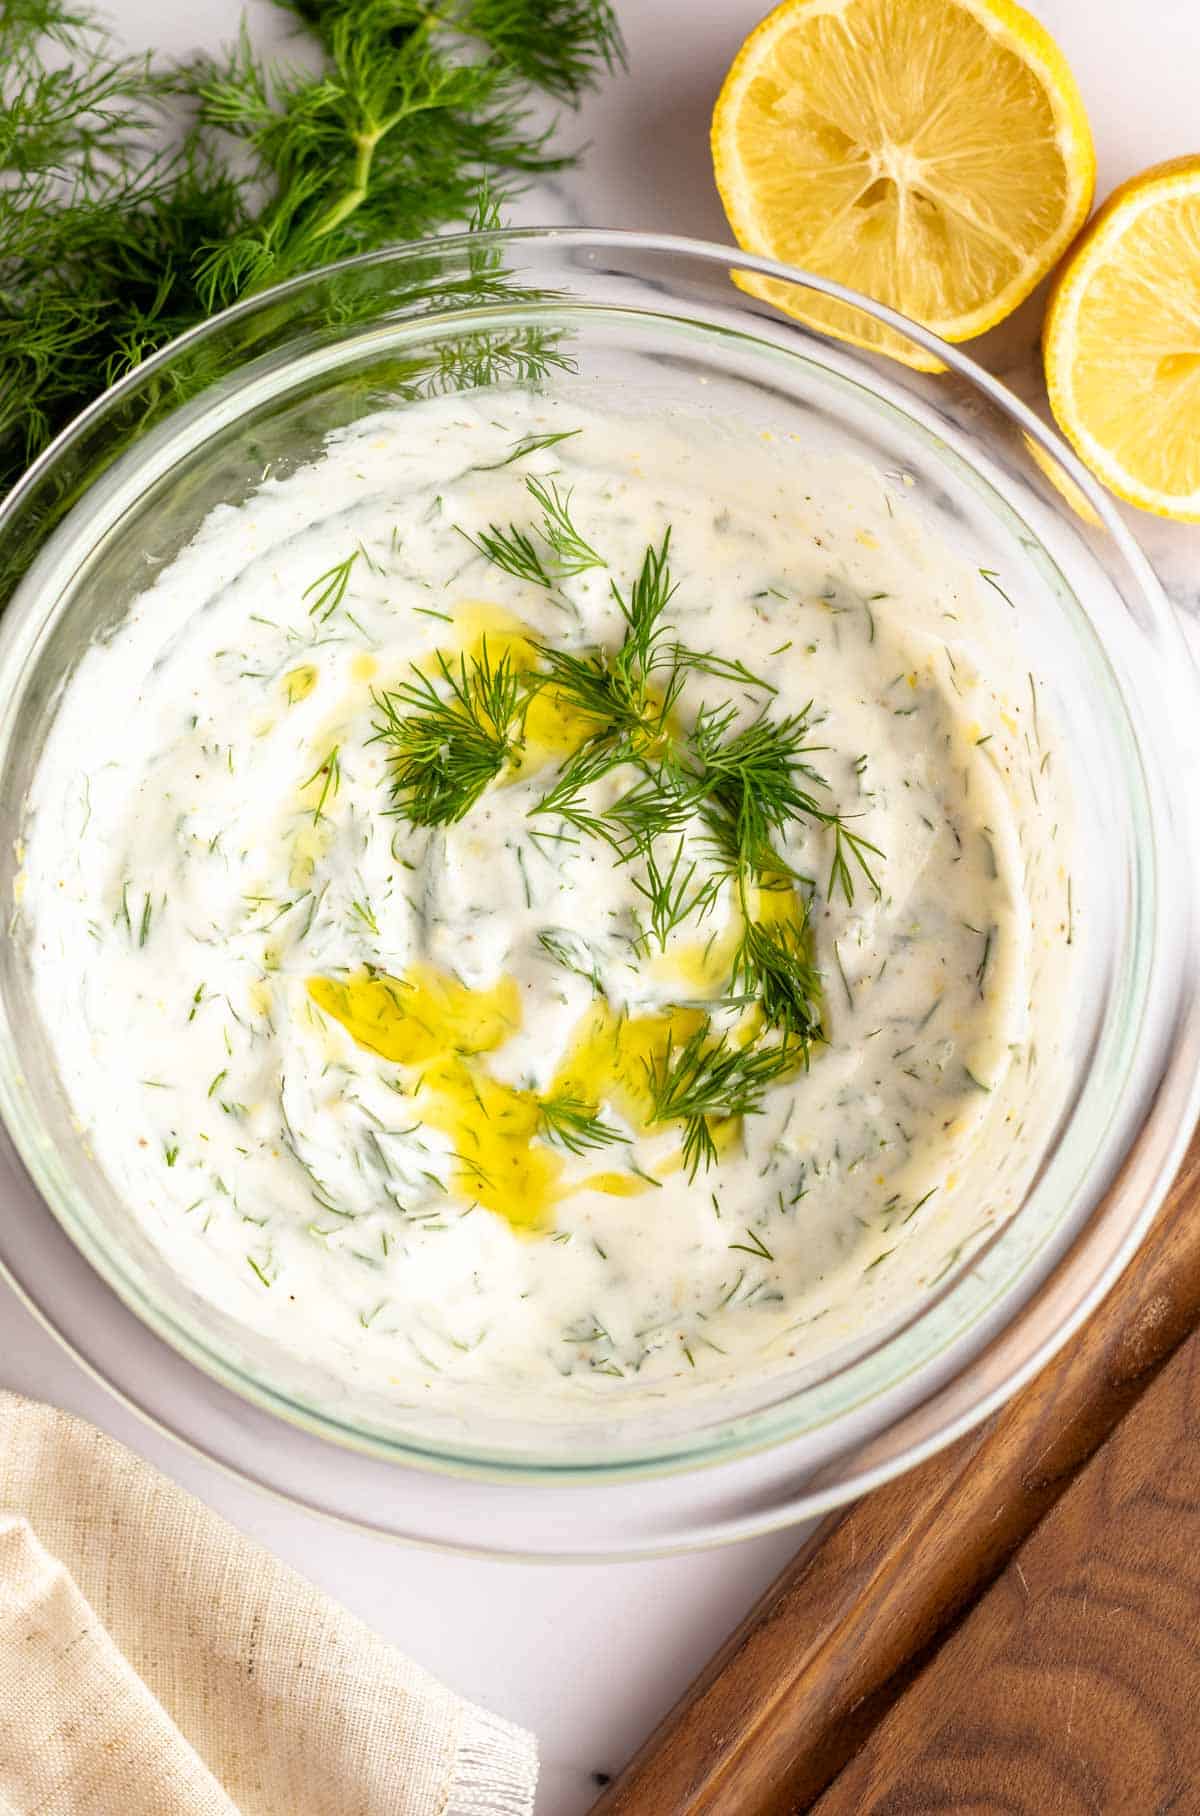 Yogurt dill sauce in a bowl with lemon and herbs surrounding it.